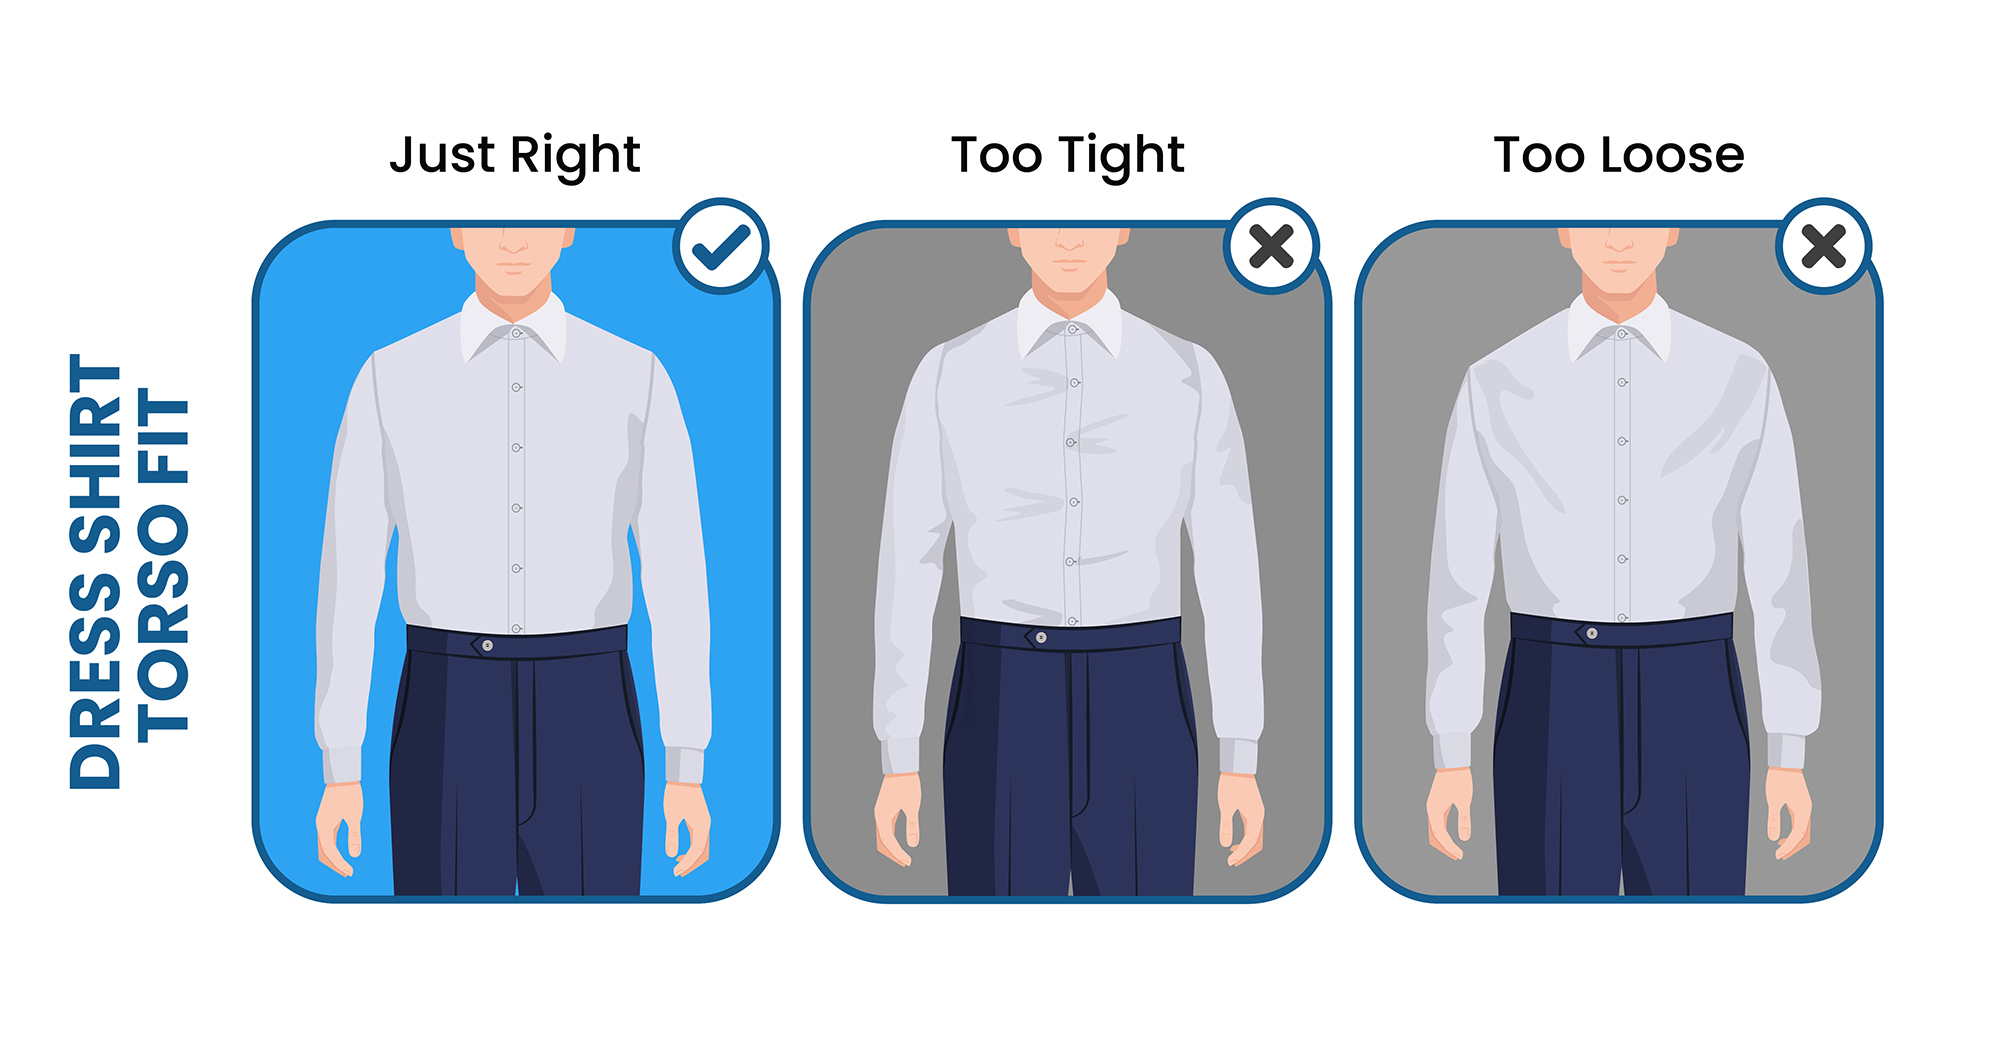 Men's dress shirt guide: with or without a pocket? Here's how to choose